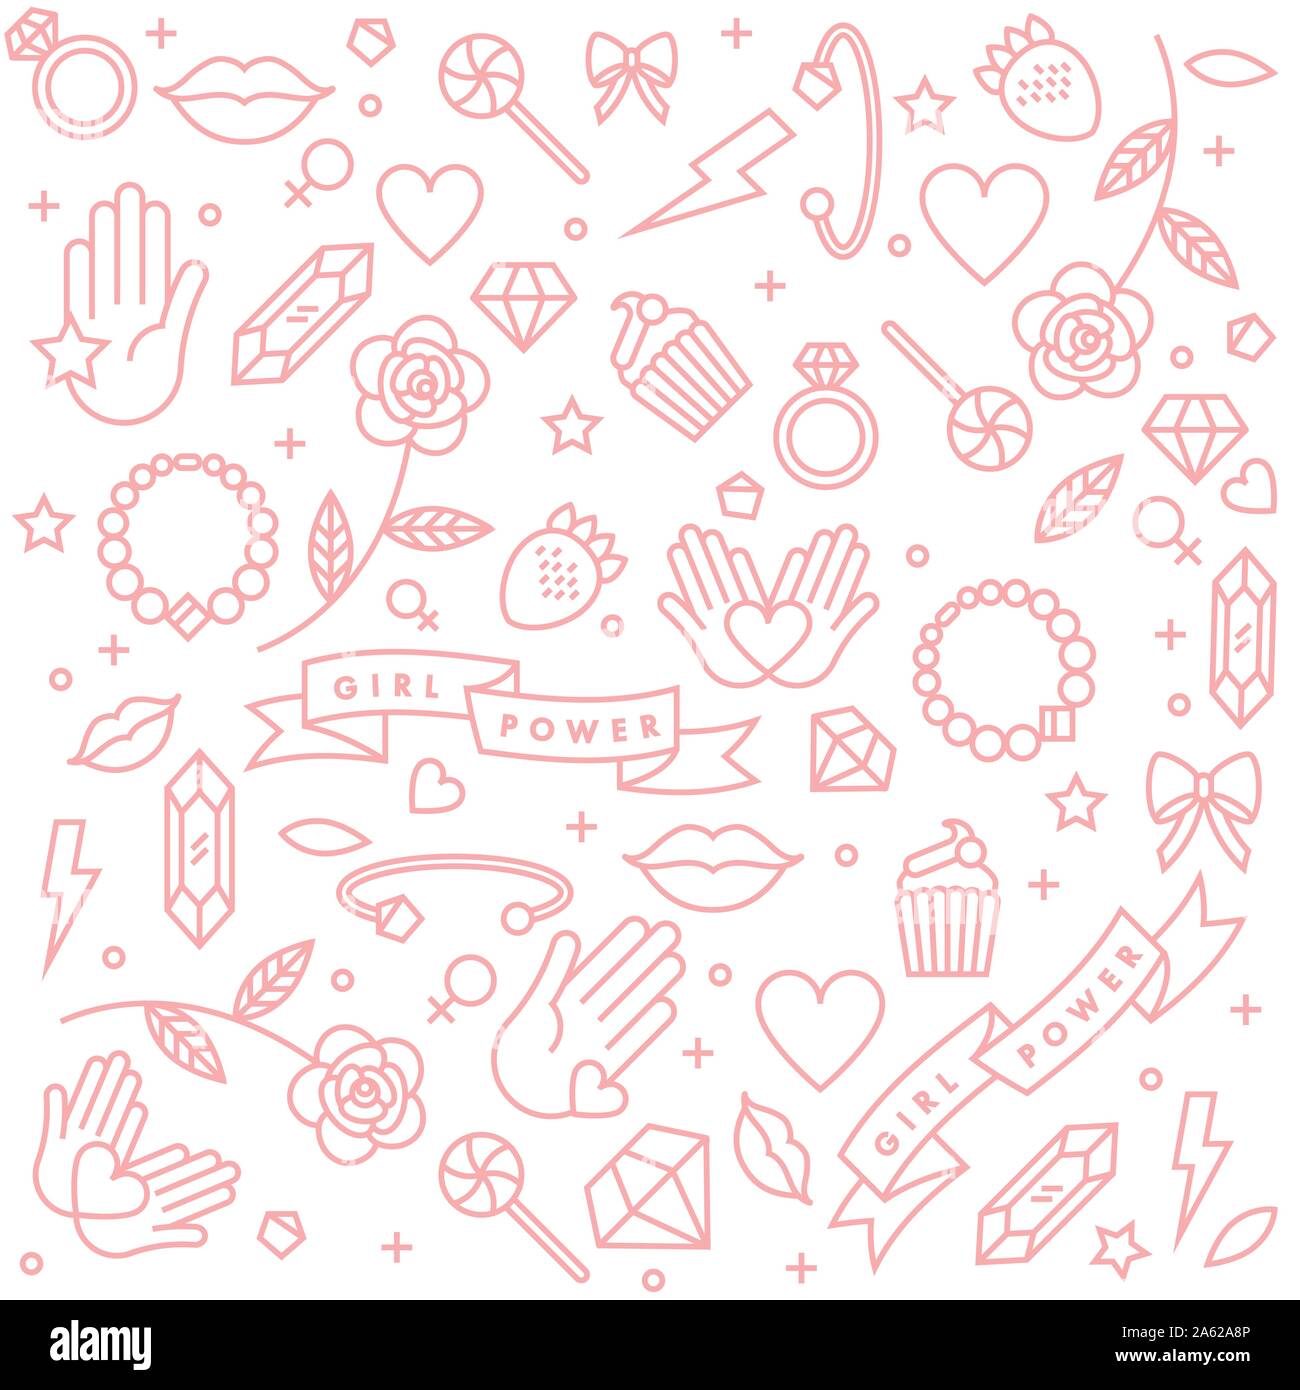 Vector pattern with icon and hand-lettering phrases related to girl power and feminist movement - abstract background for prints, t-shirts, cards. Stock Vector